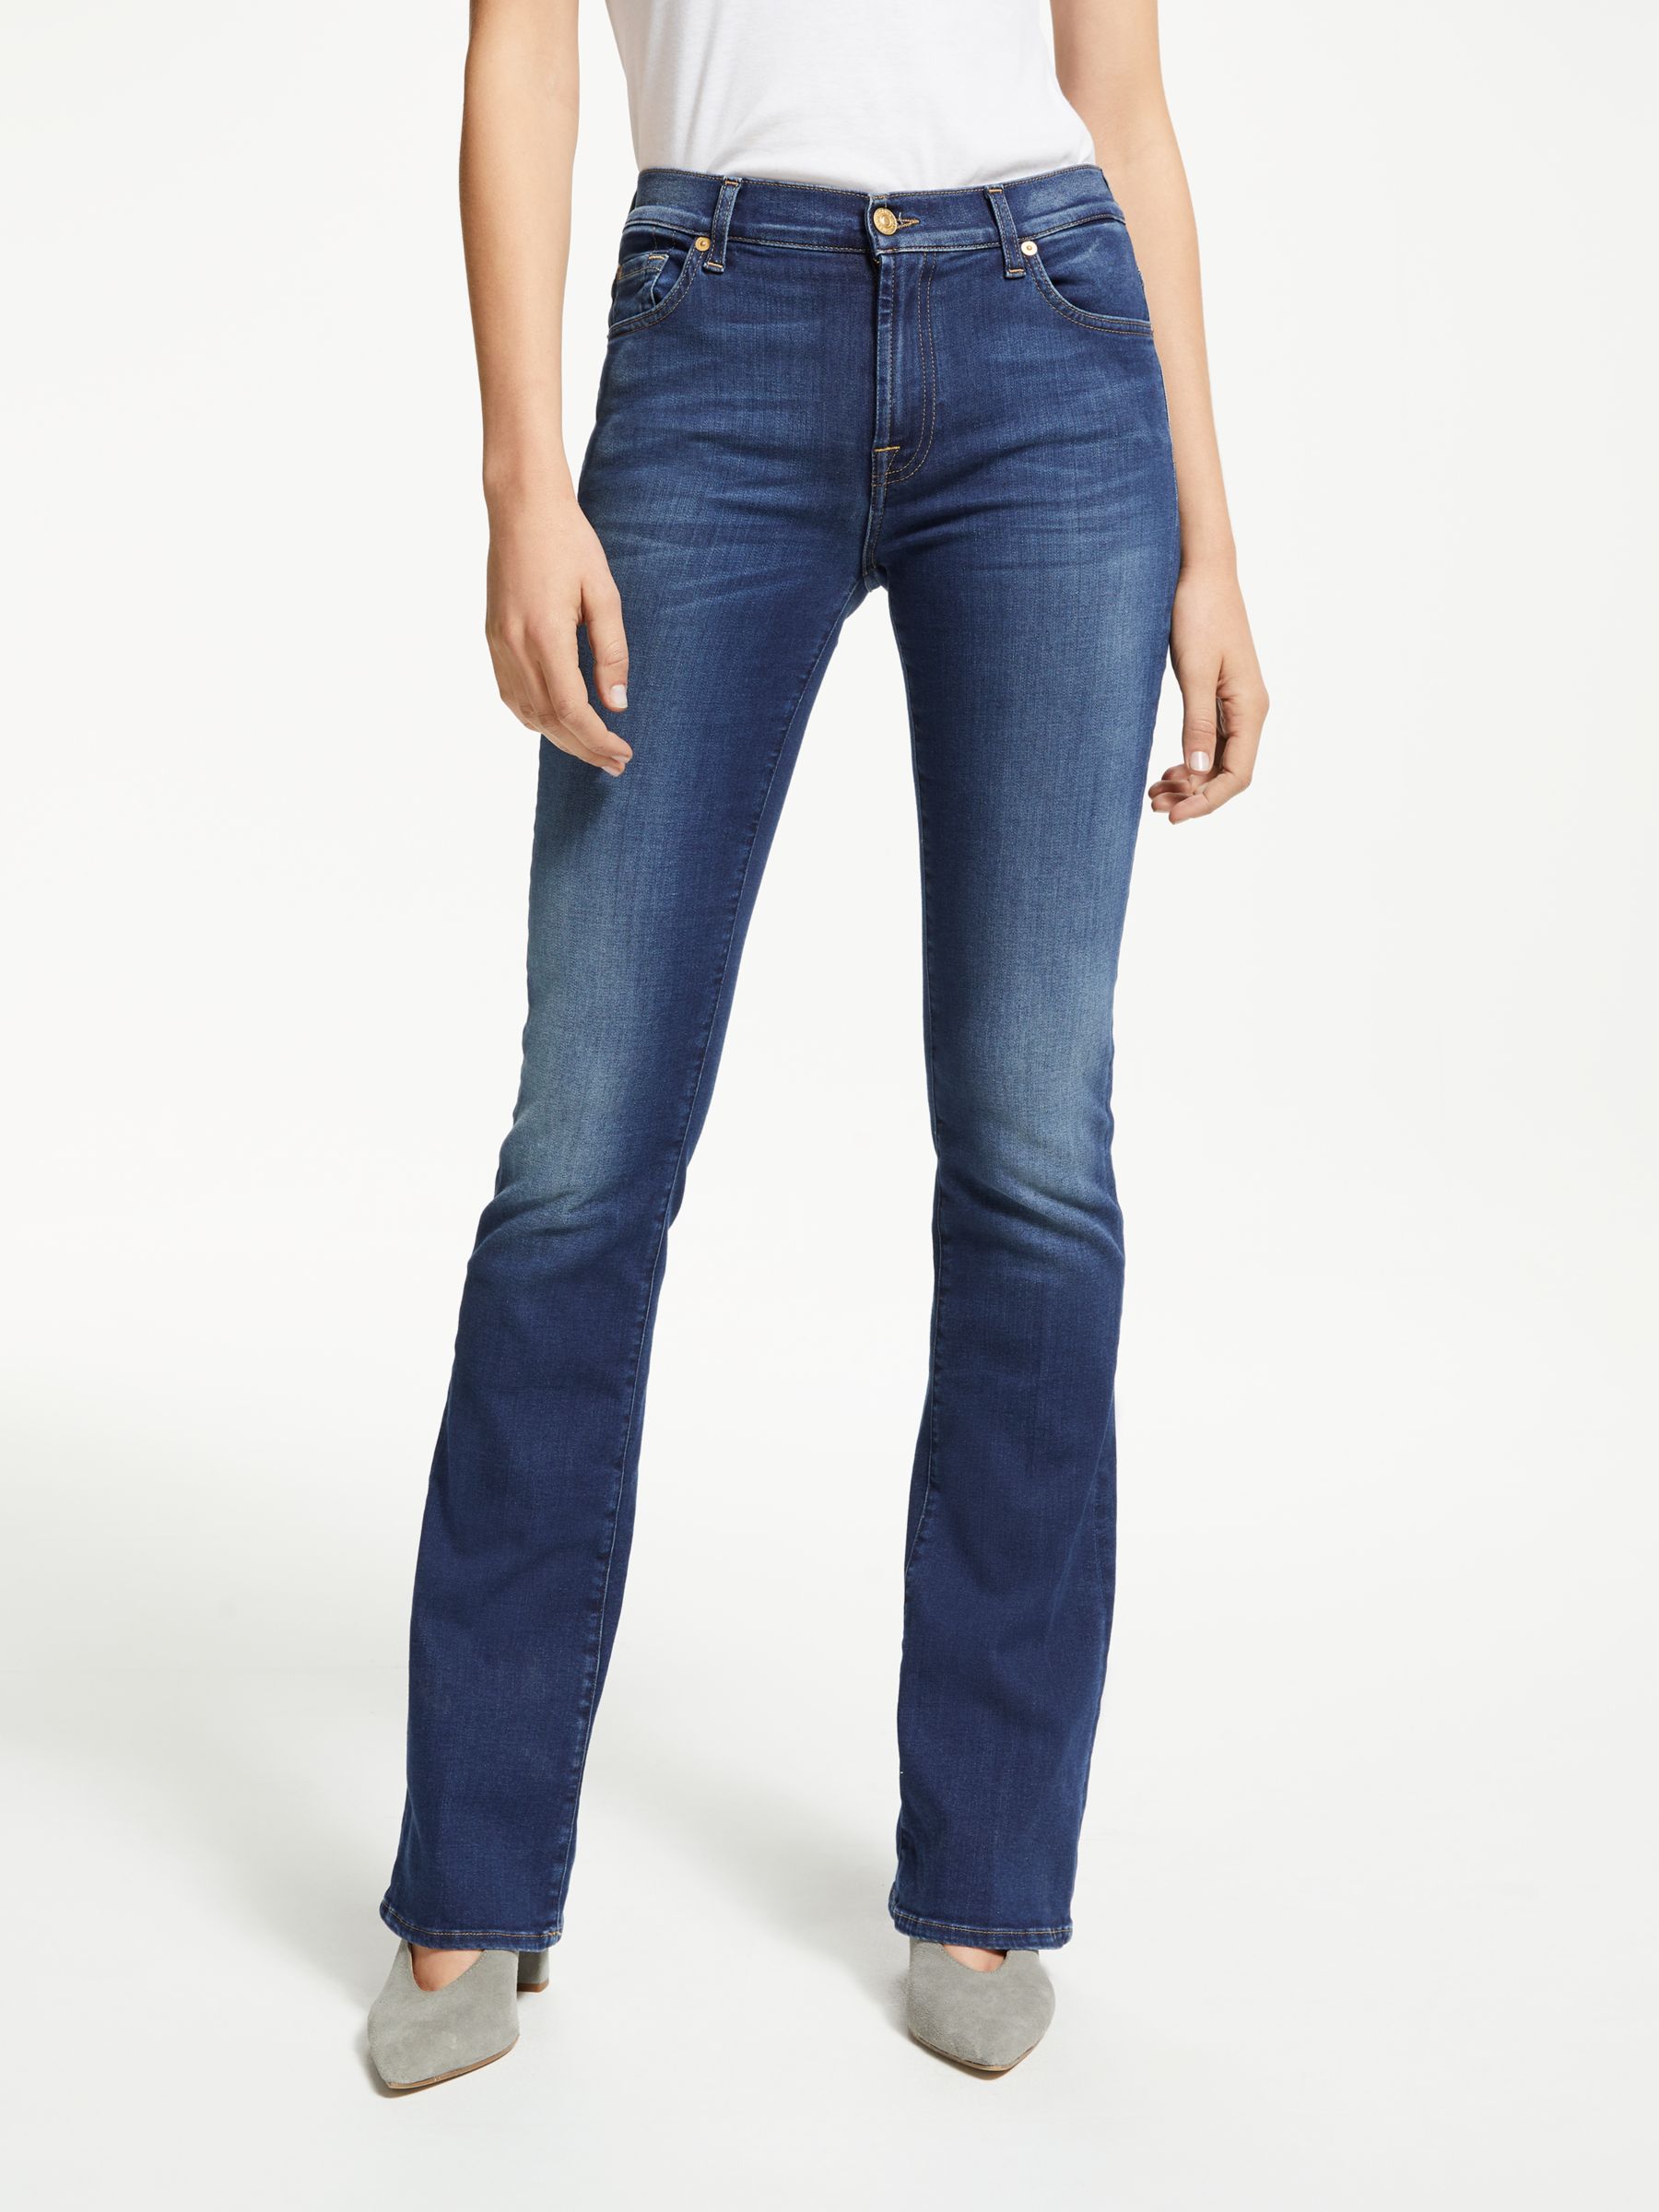 7 for all mankind women